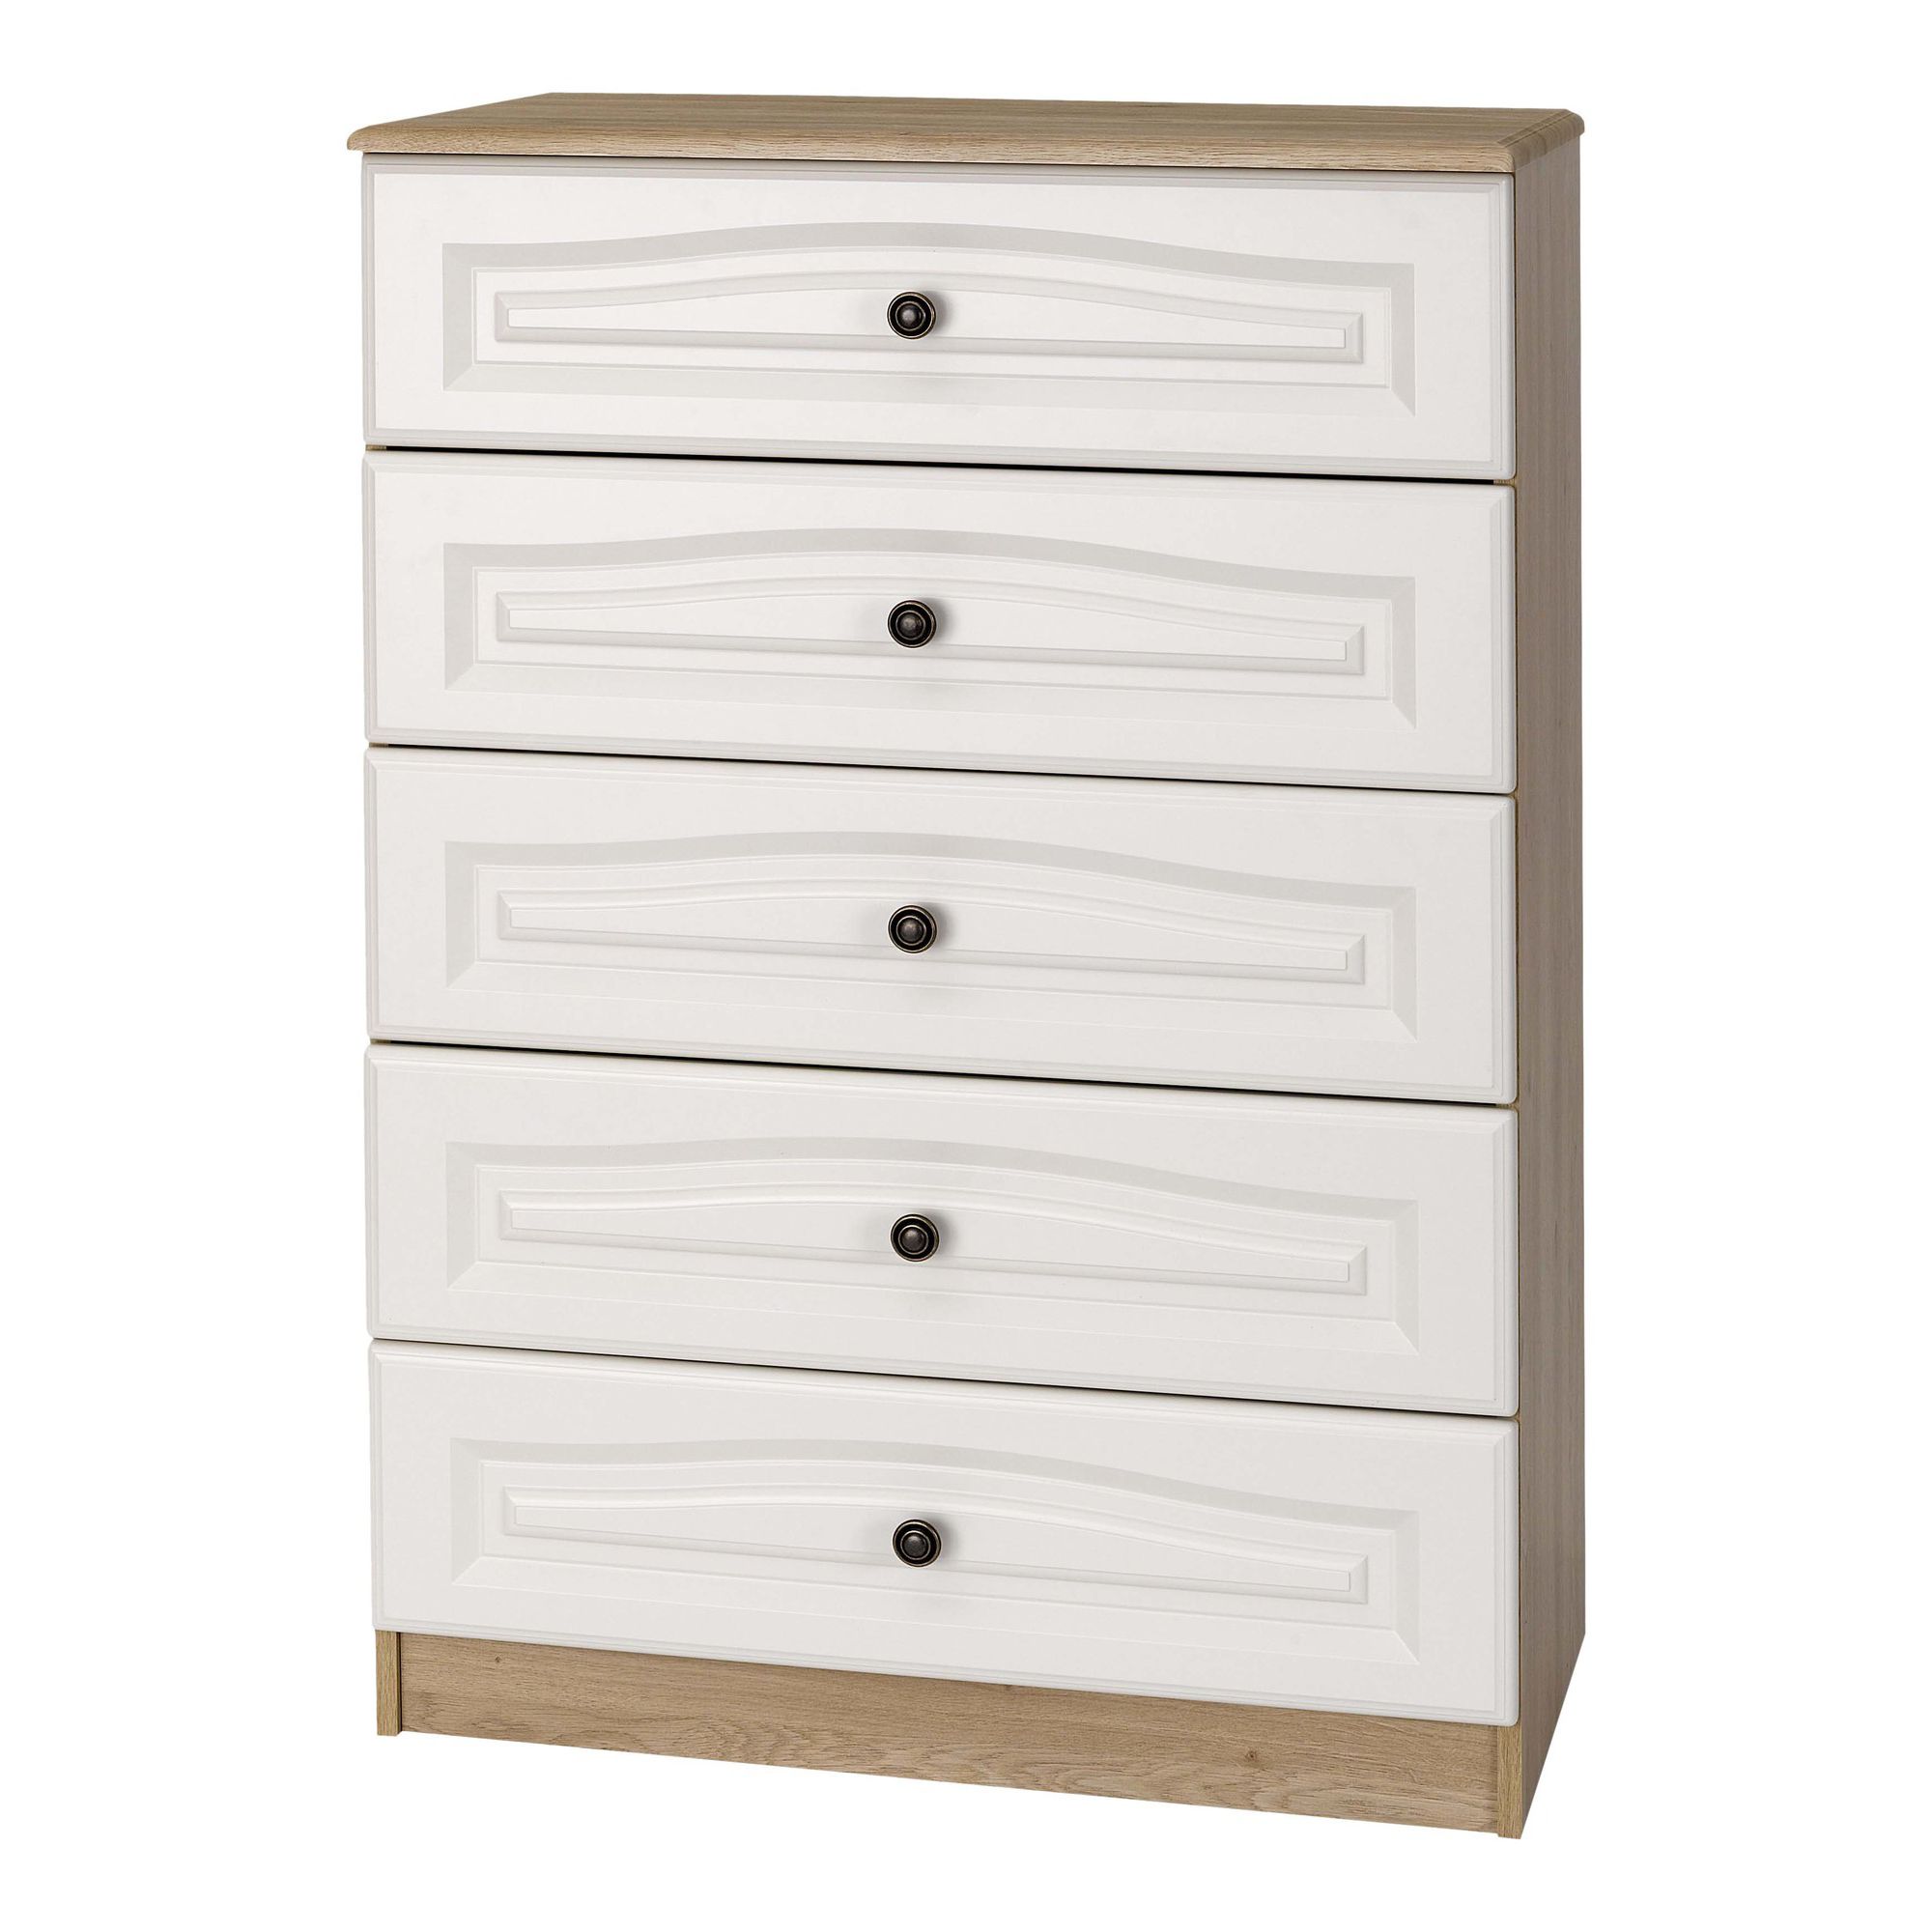 Alto Furniture Visualise Bordeaux Five Drawer Chest in Oak with Light Front at Tesco Direct